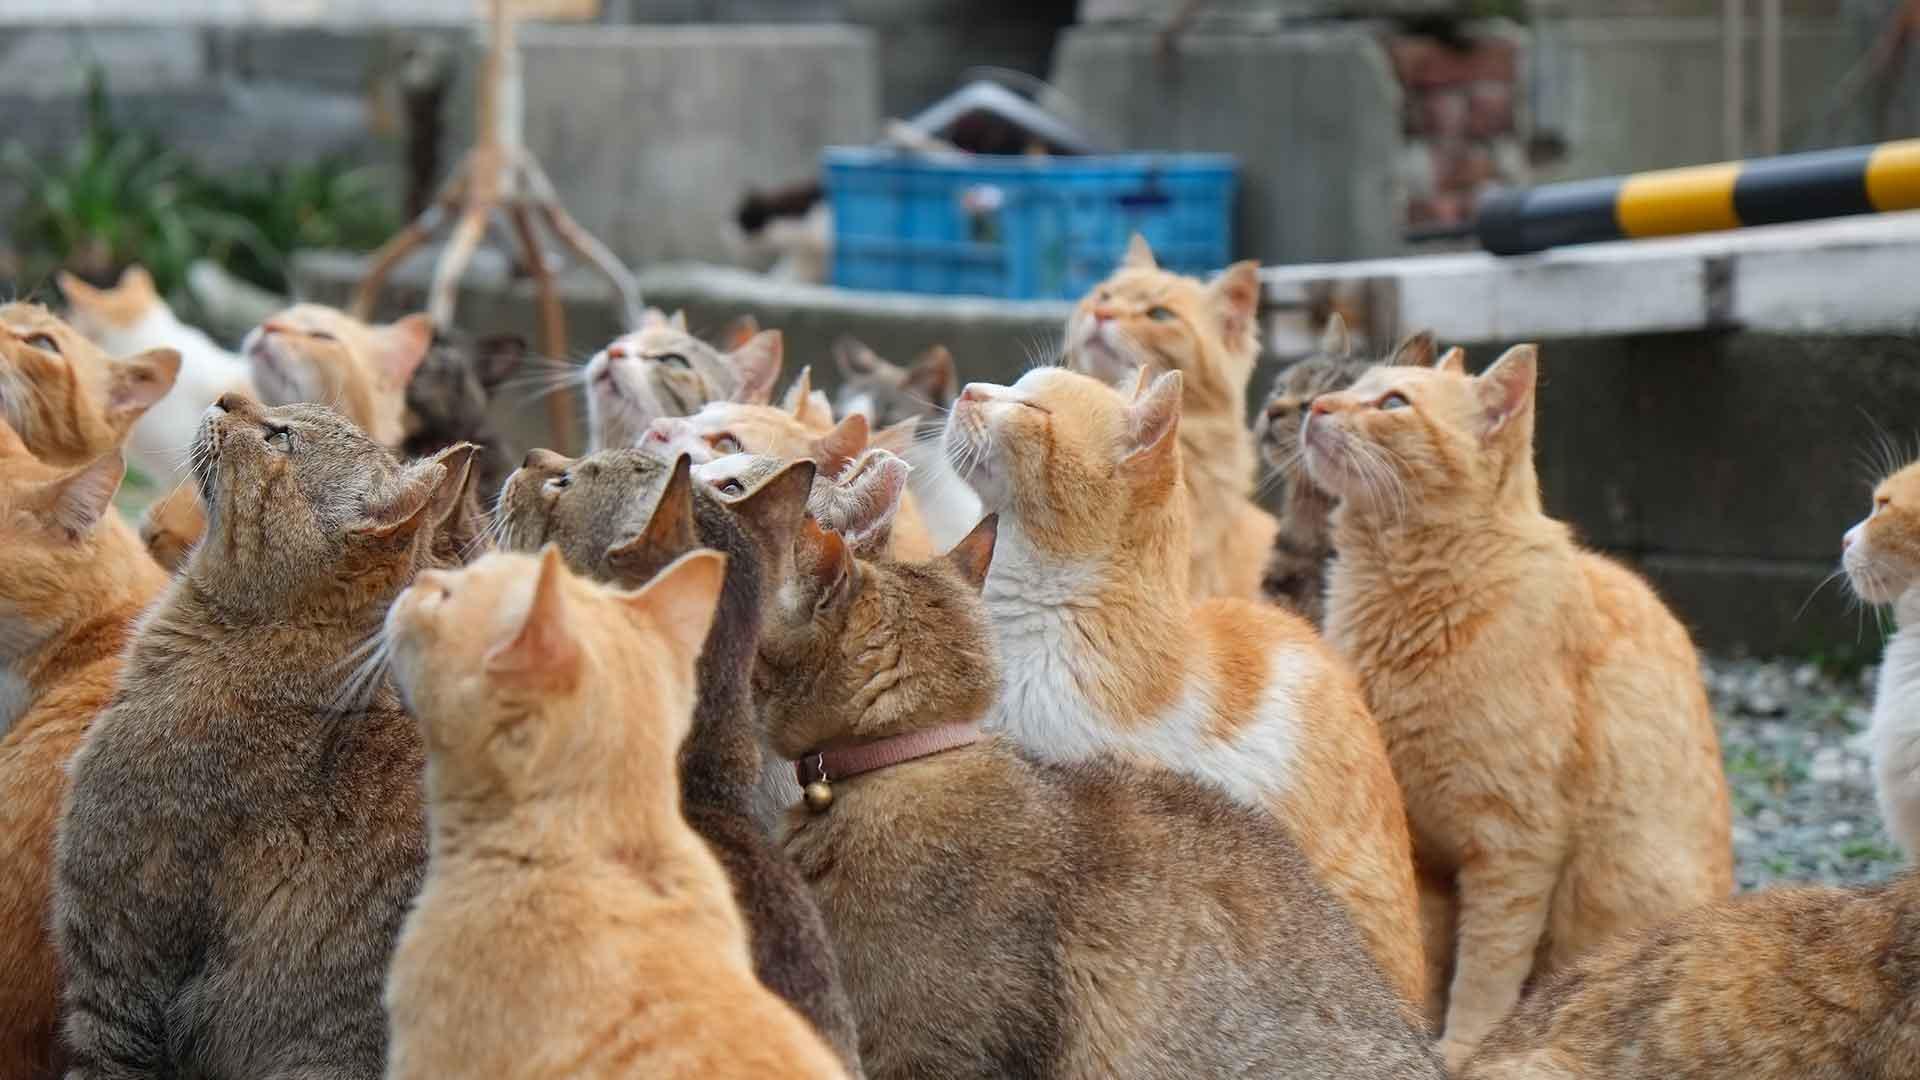 Aoshima Island in Ehime: All You Need to Know Before Going to This Cat  Island